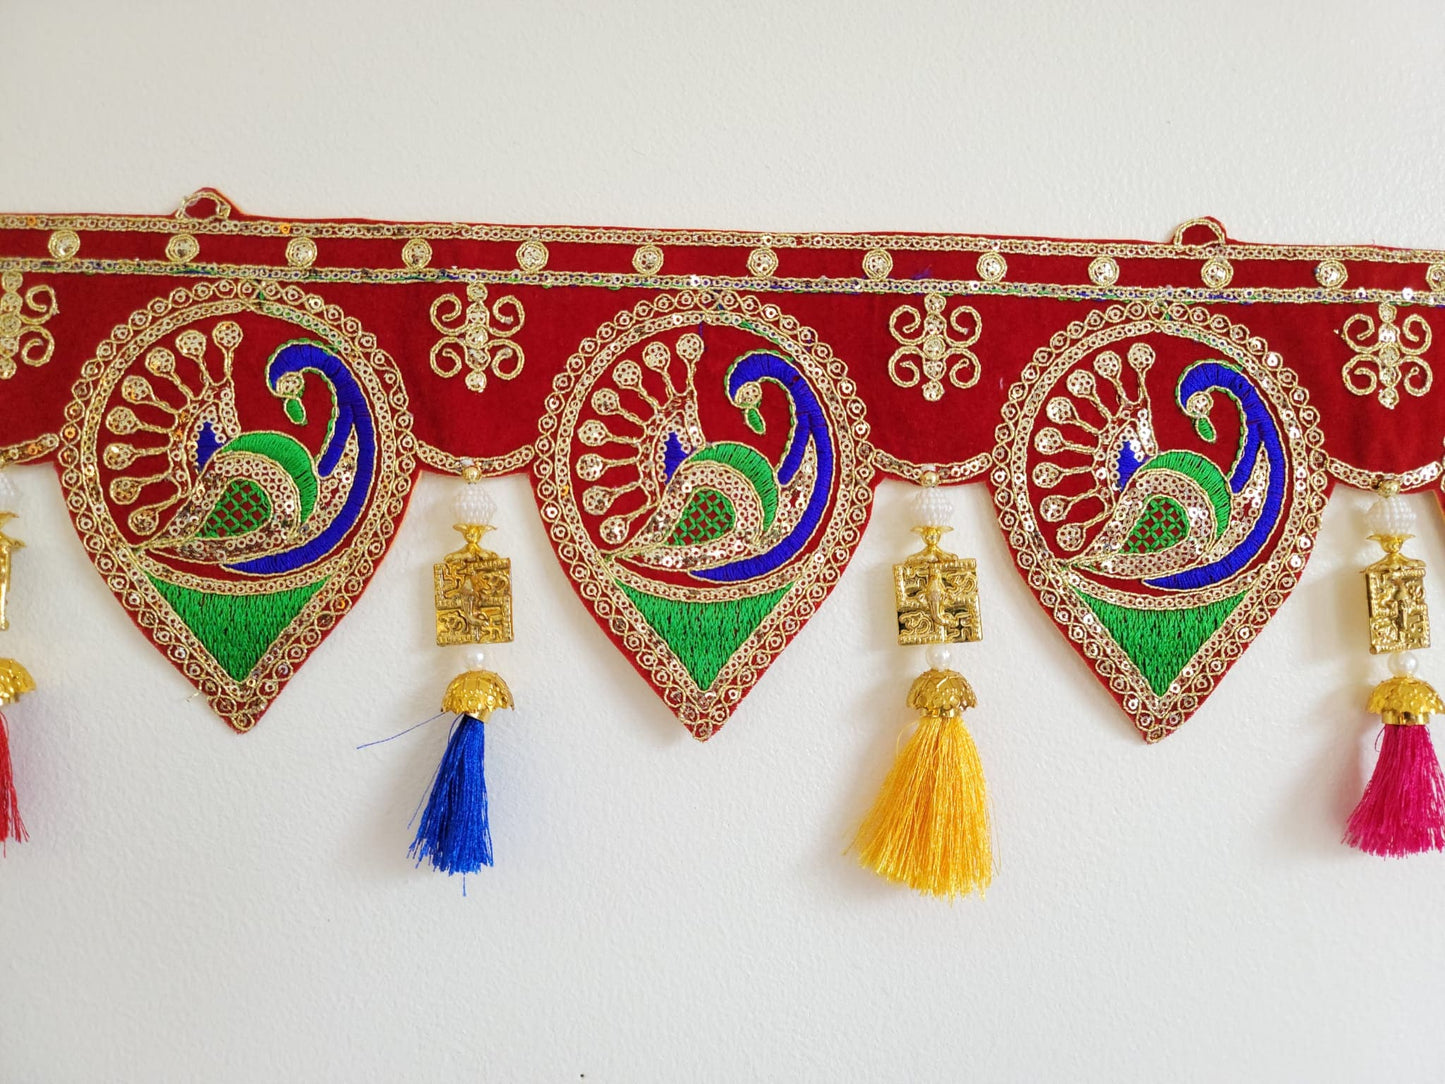 Bohemian Peacock home decoration with colorful silk tassels, embroidered gypsy curtain, hippie door frame, Indian handmade ethnic tapestry. Great gift and decor for Diwali, house warming and auspicious events